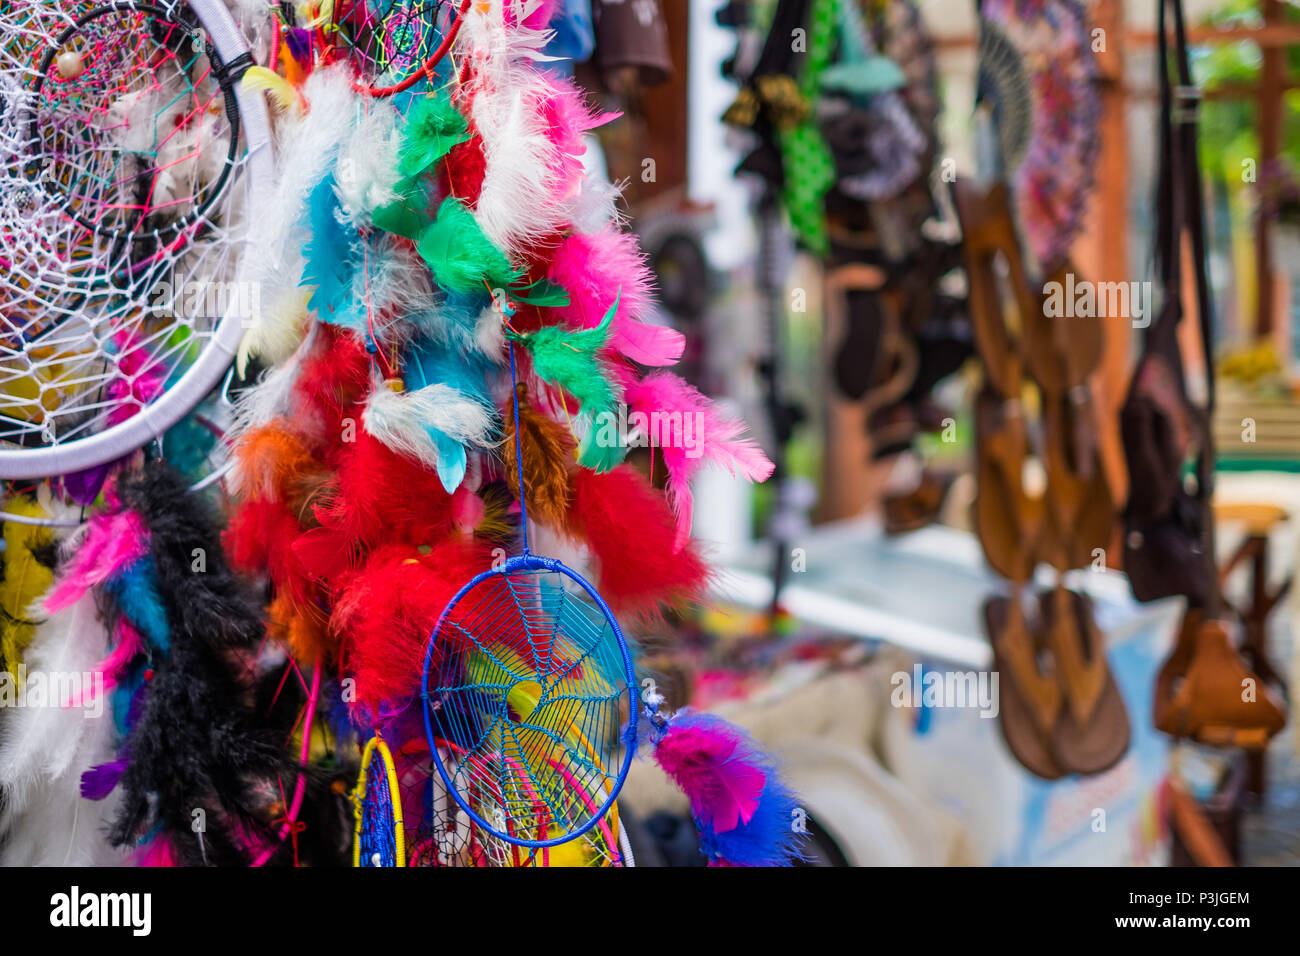 Colourful traditional craft in the market in Colombia Stock Photo